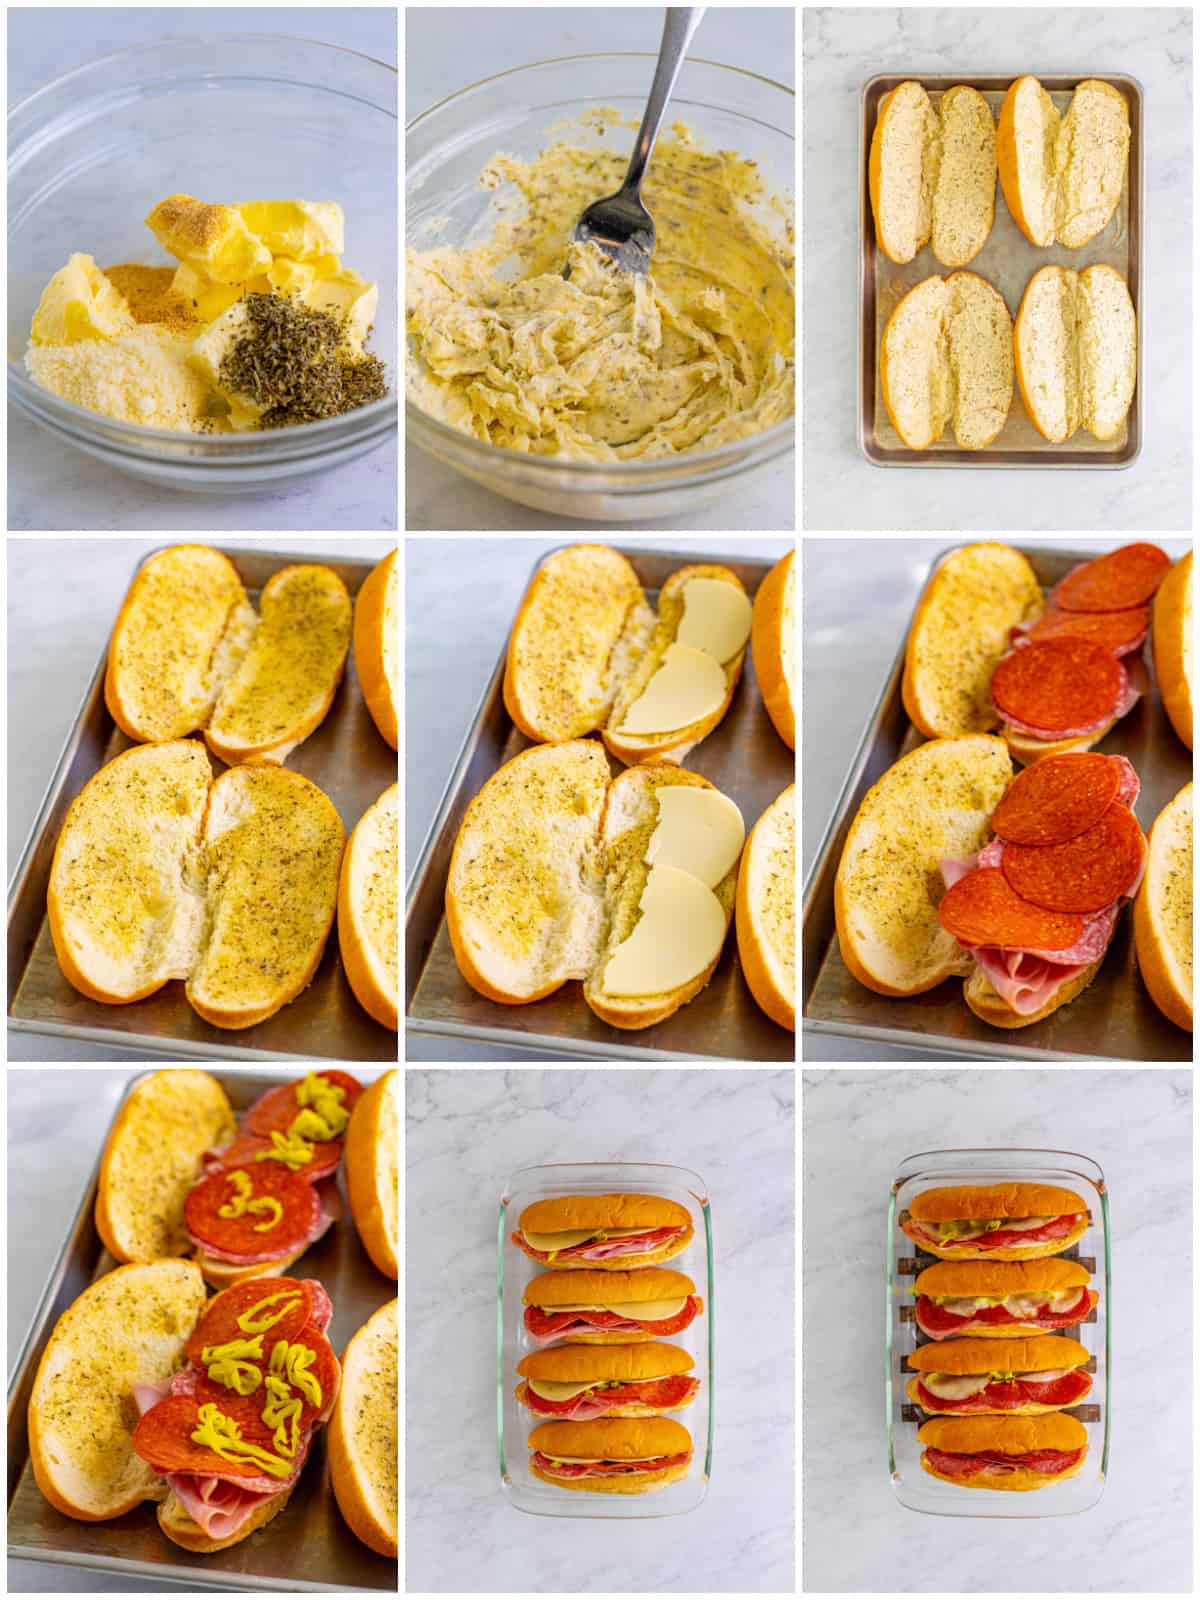 Step by step photos on how to make Baked Italian Subs.